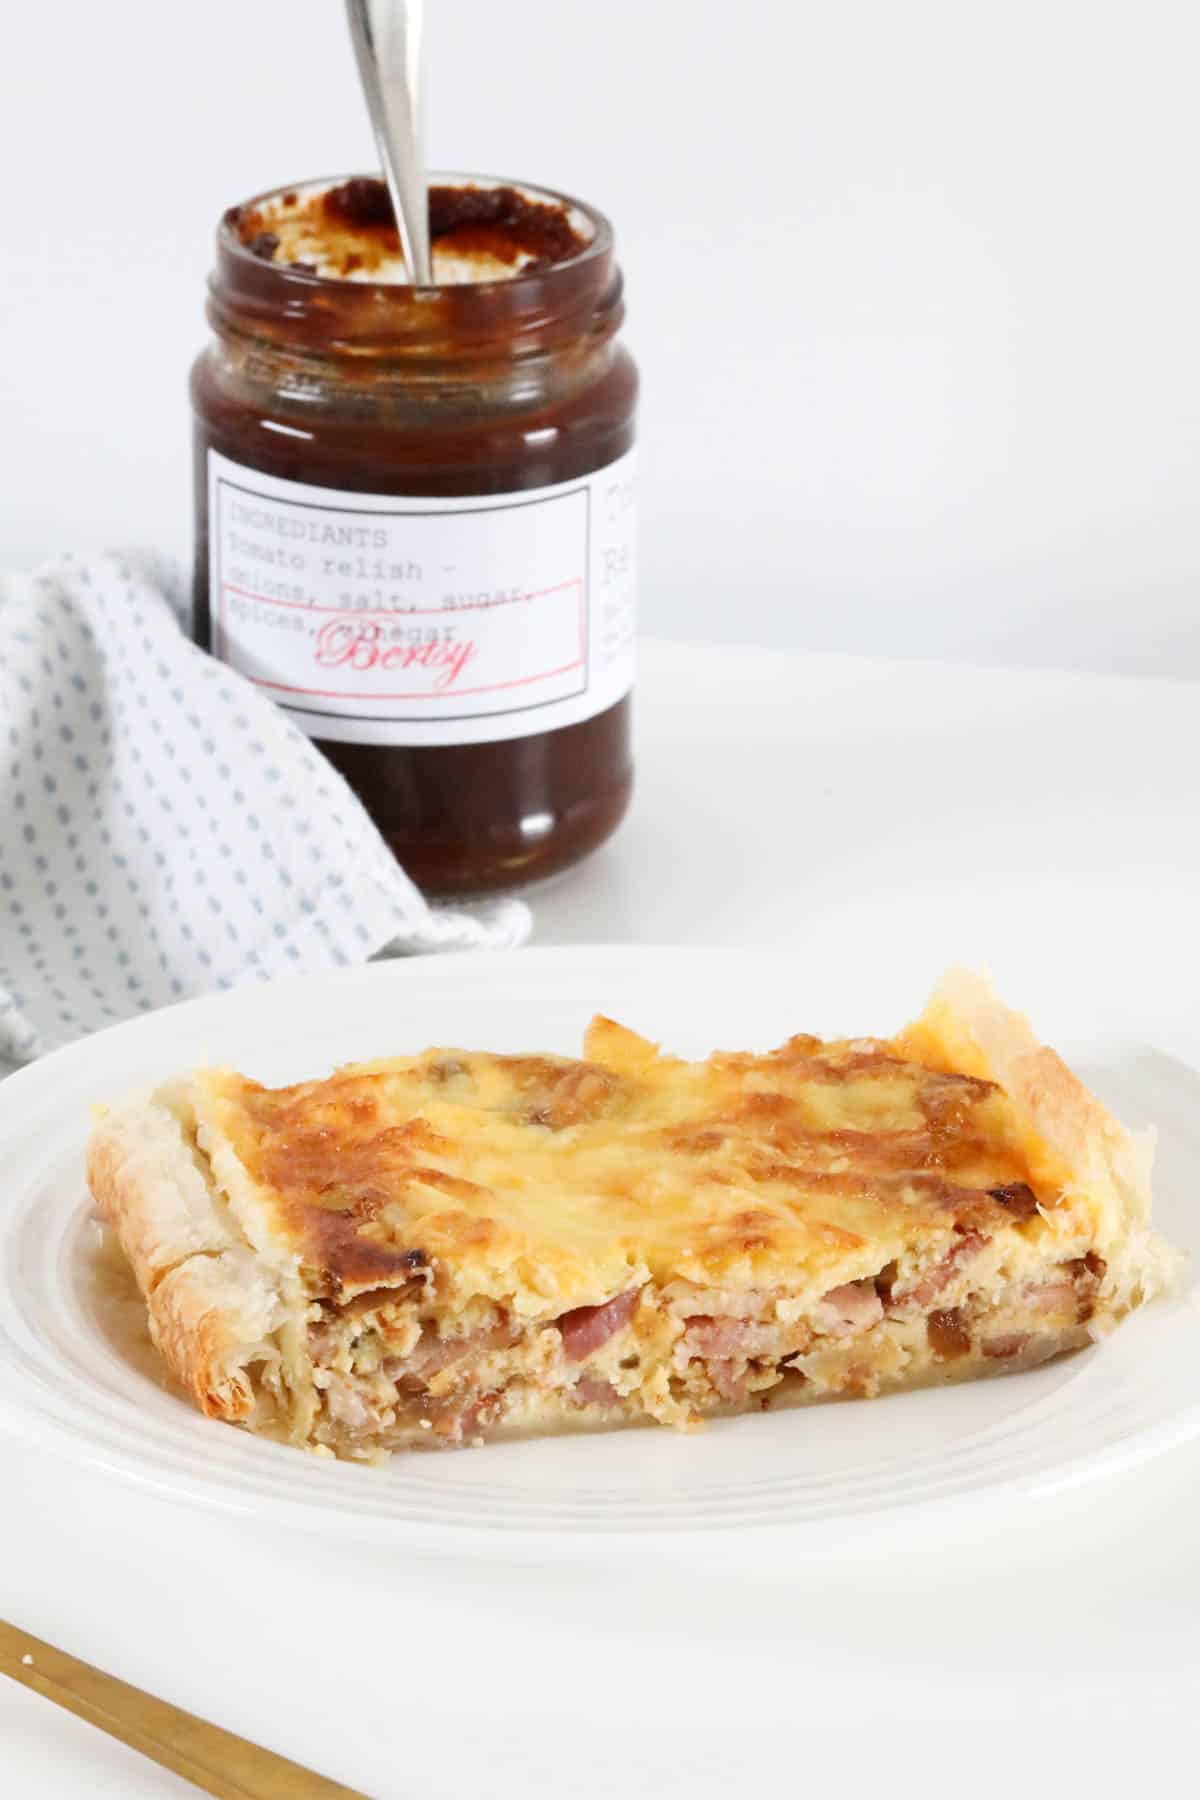 Egg and bacon pie on a white plate with a jar of tomato relish in the background.